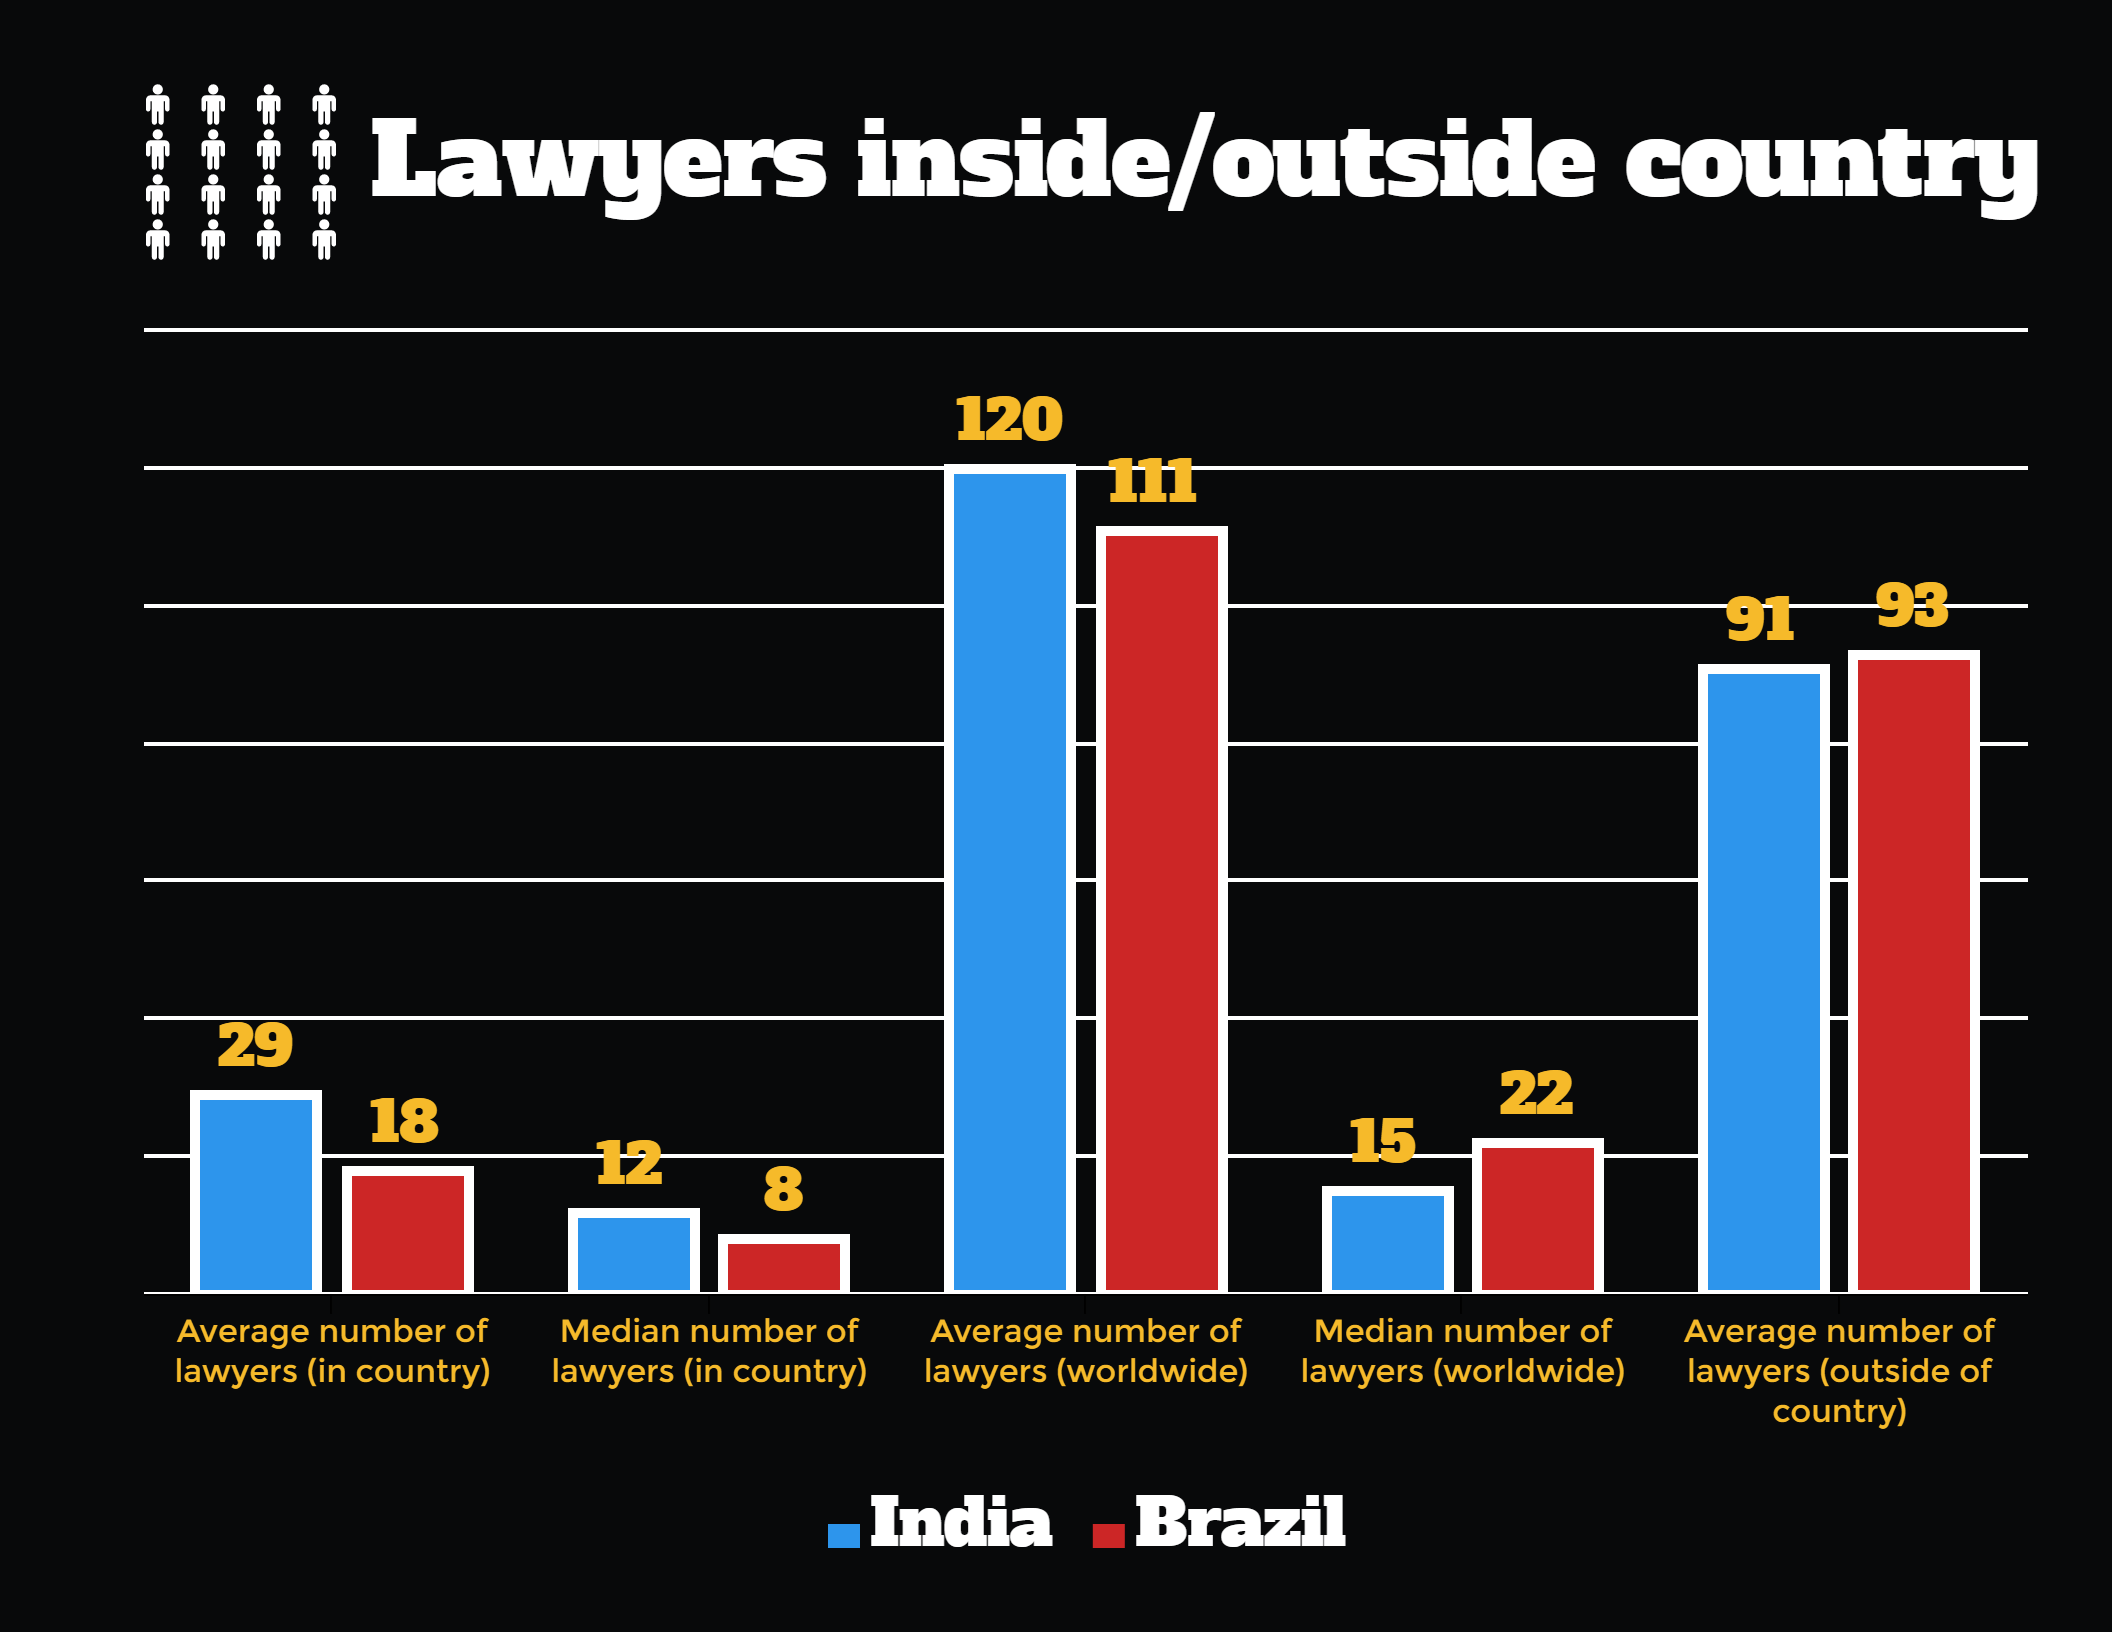 Legal department sizes in India and Brazil.